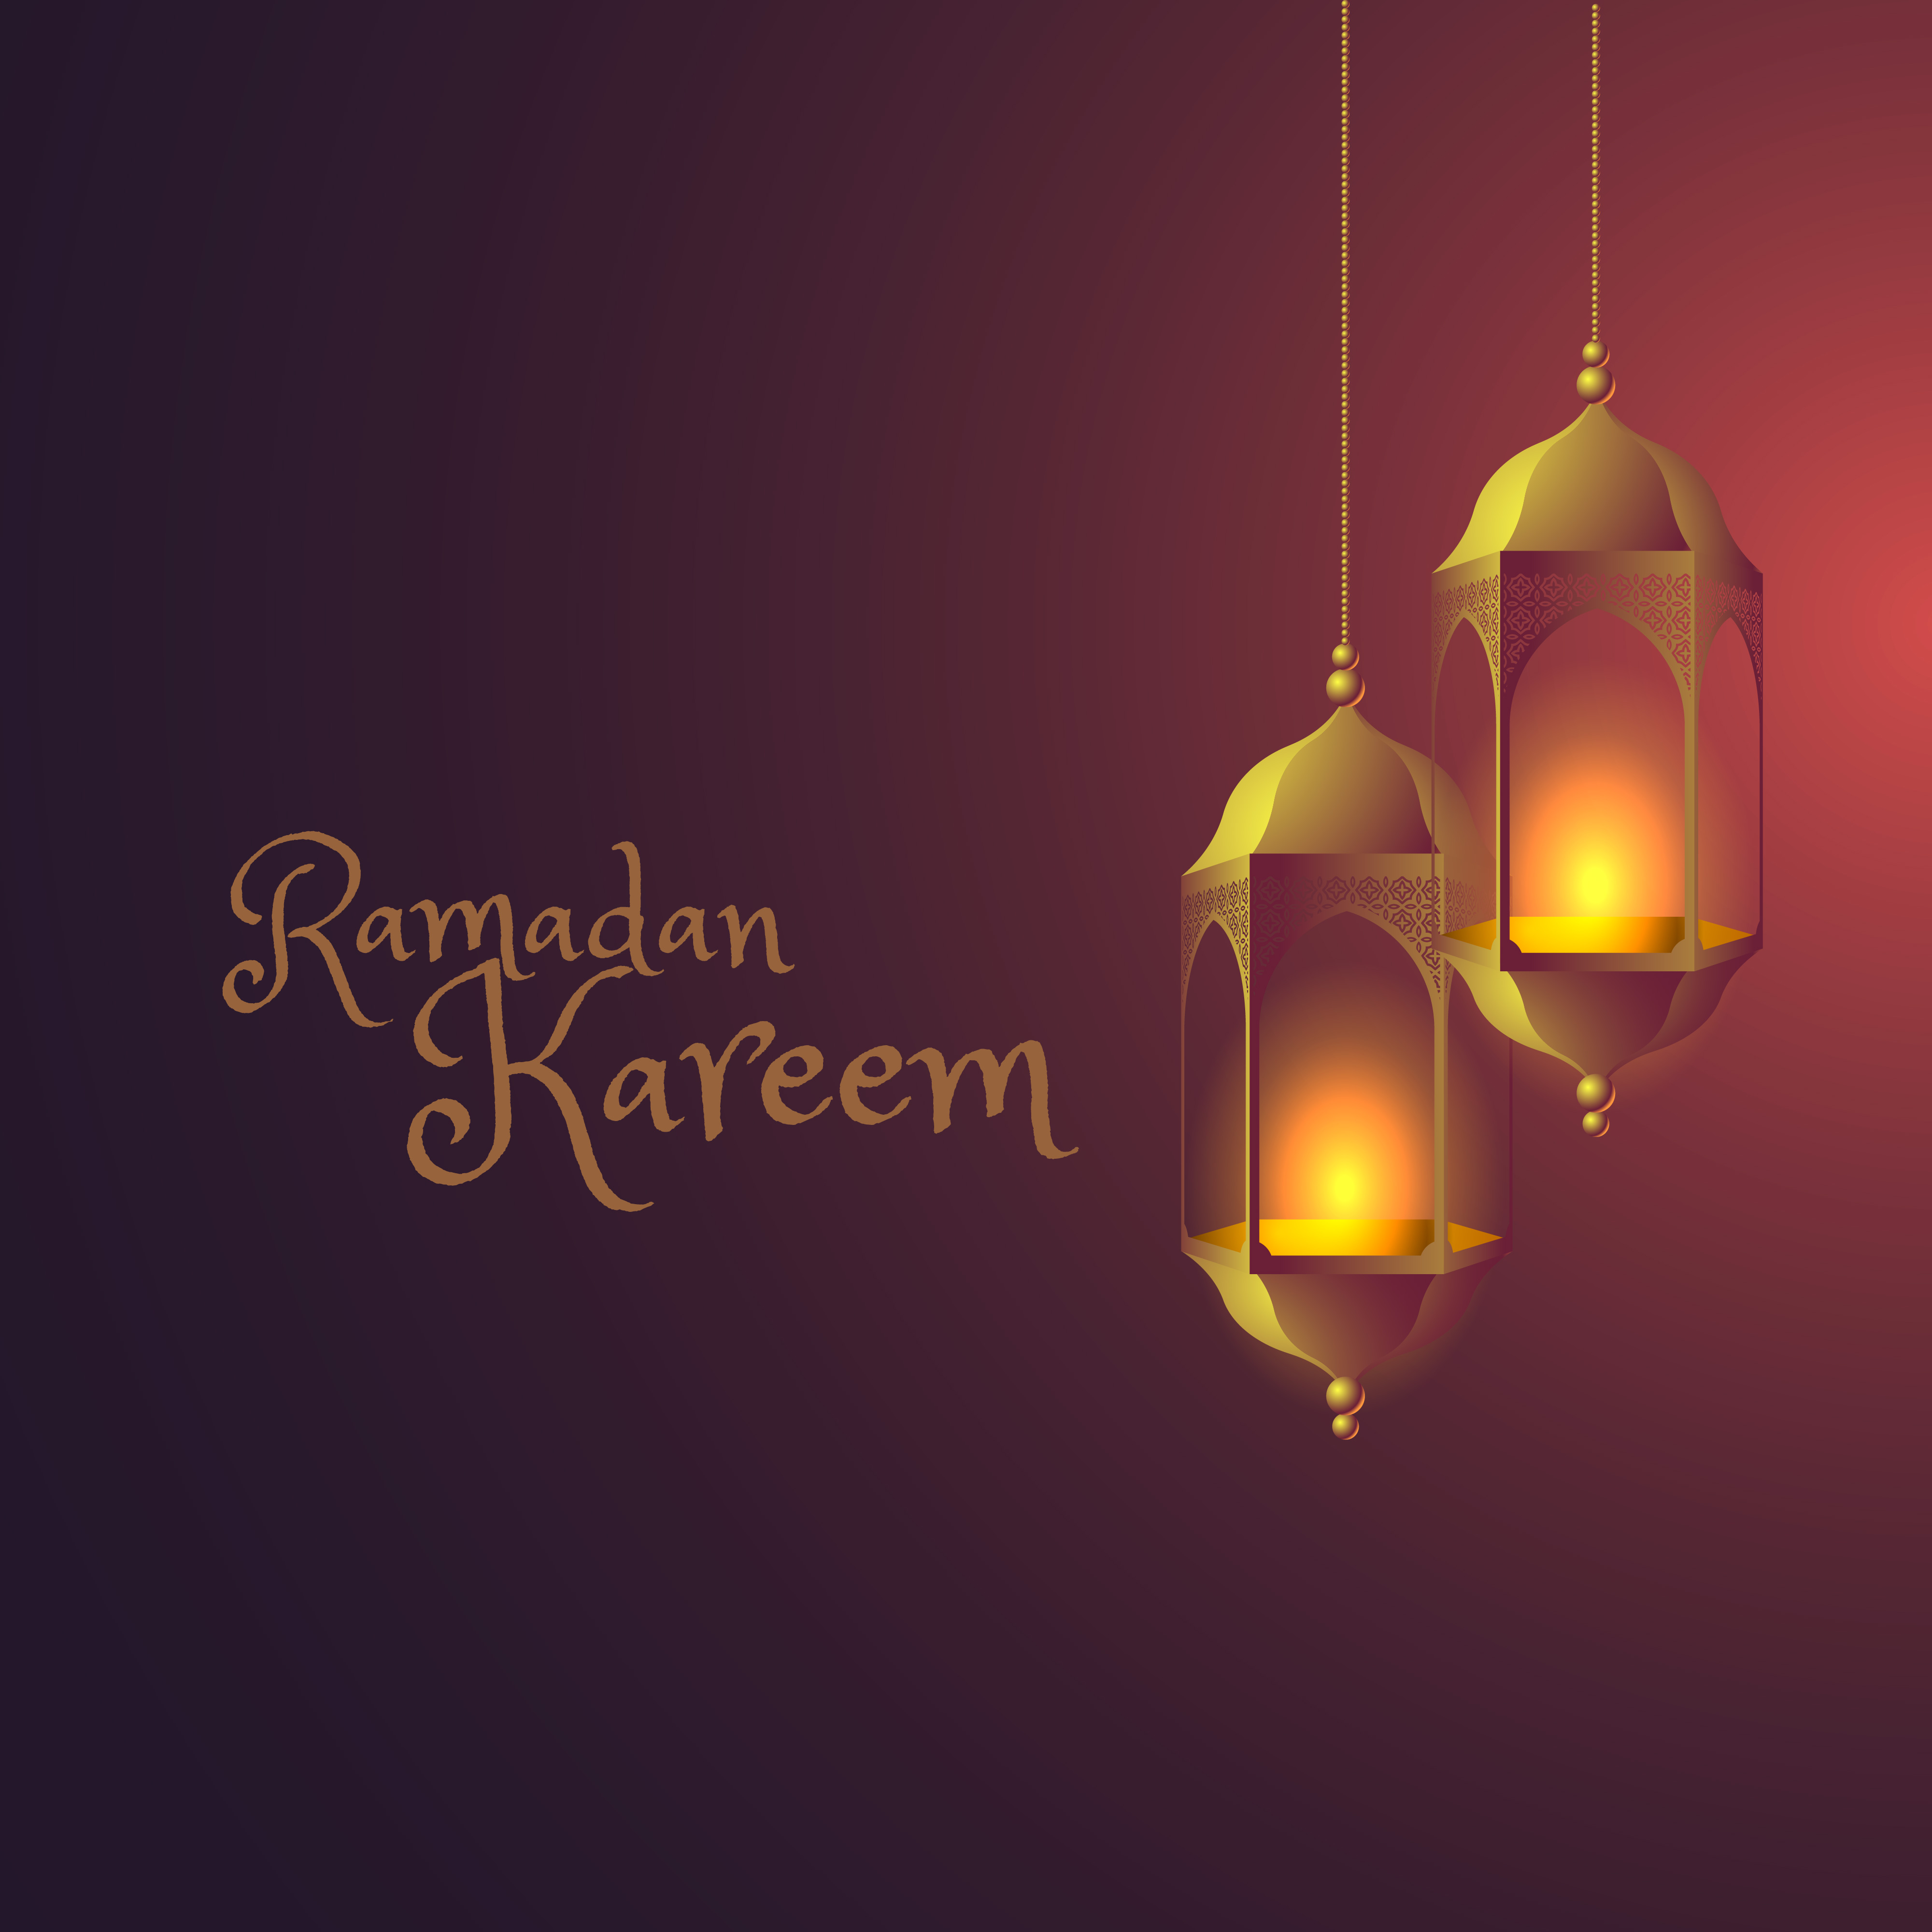 Ramadan background with hanging lamps - Download Free 